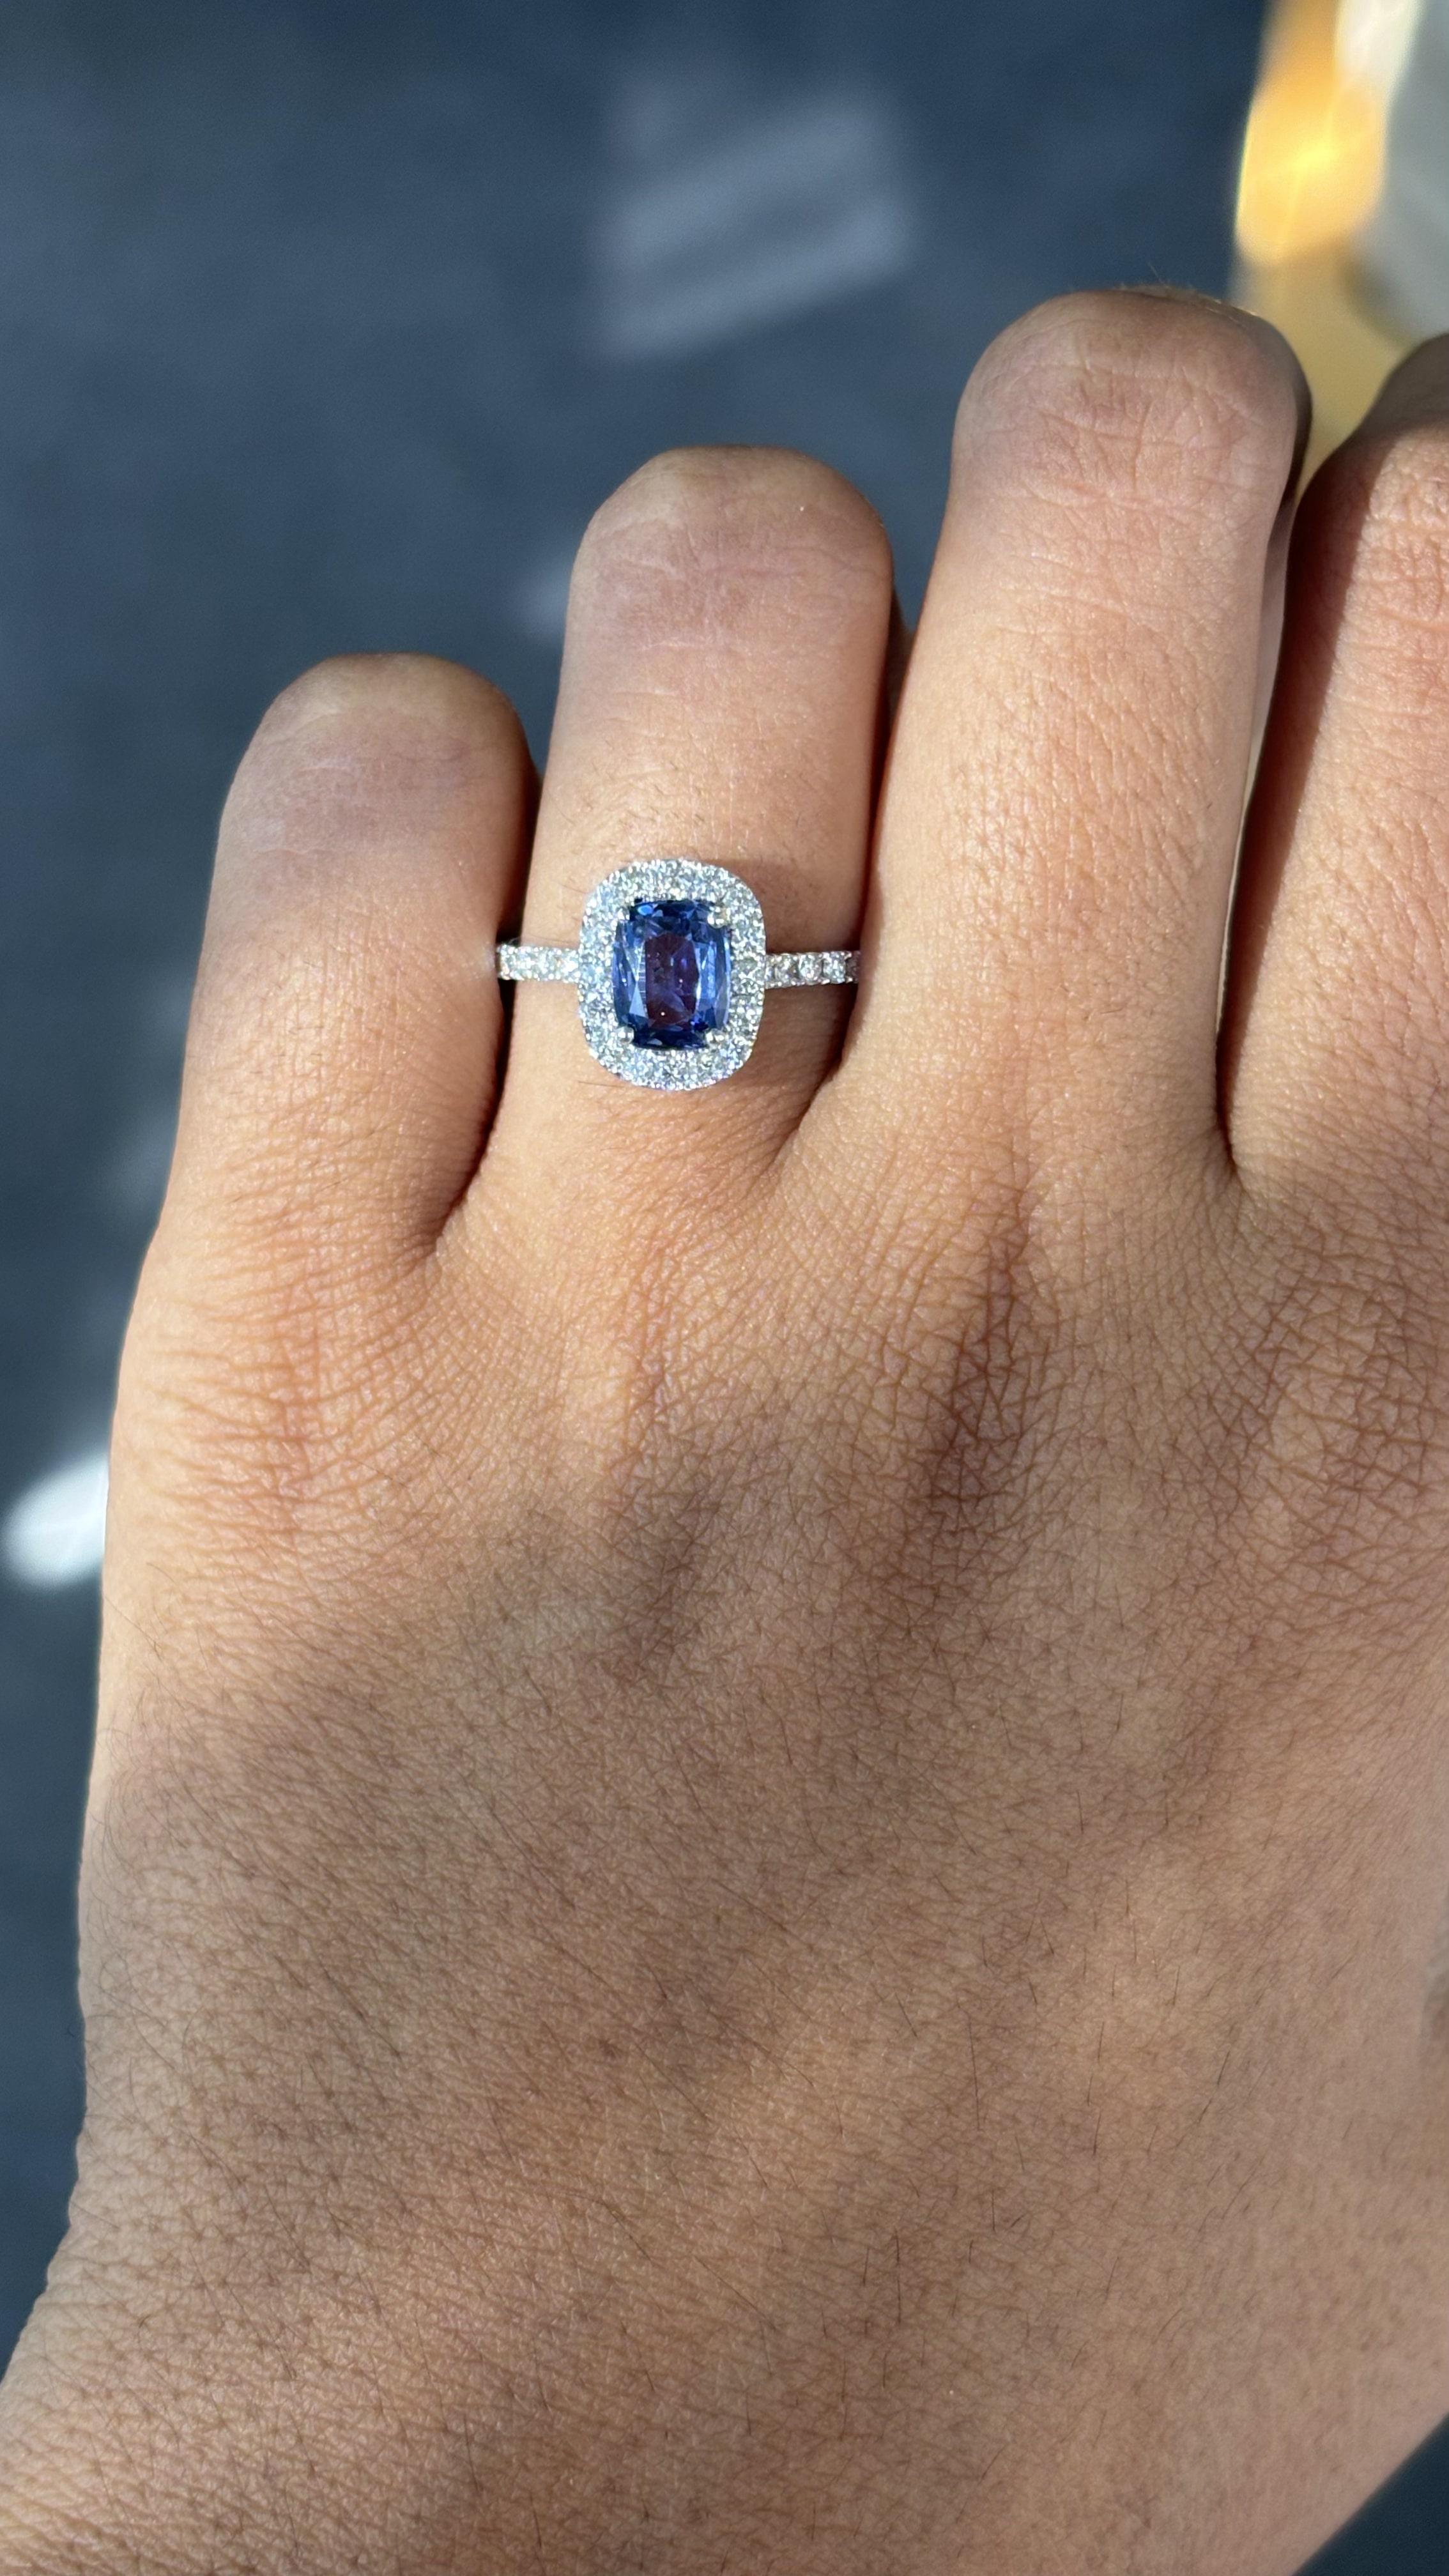 1.21 Carat Ceylon Blue Sapphire Ring with Halo Diamonds in 14K White Gold For Sale 3